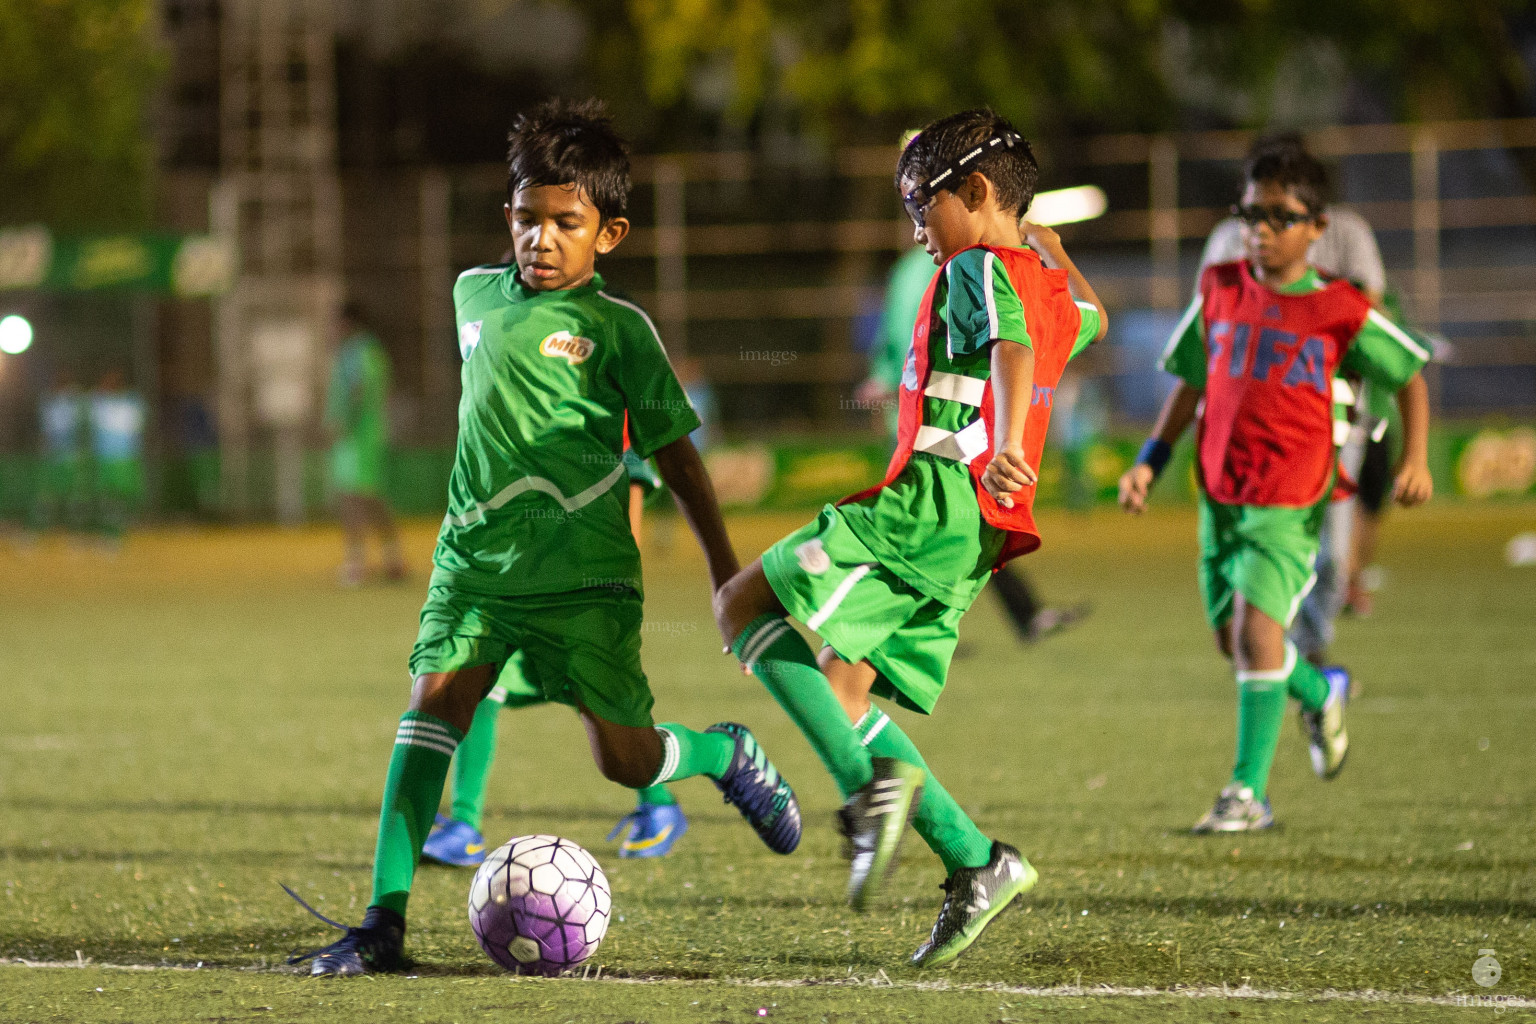 MILO Road To Barcelona (Selection Day 2) 2018 In Male' Maldives, October 10, Wednesday 2018 (Images.mv Photo/Abdulla Abeedh)